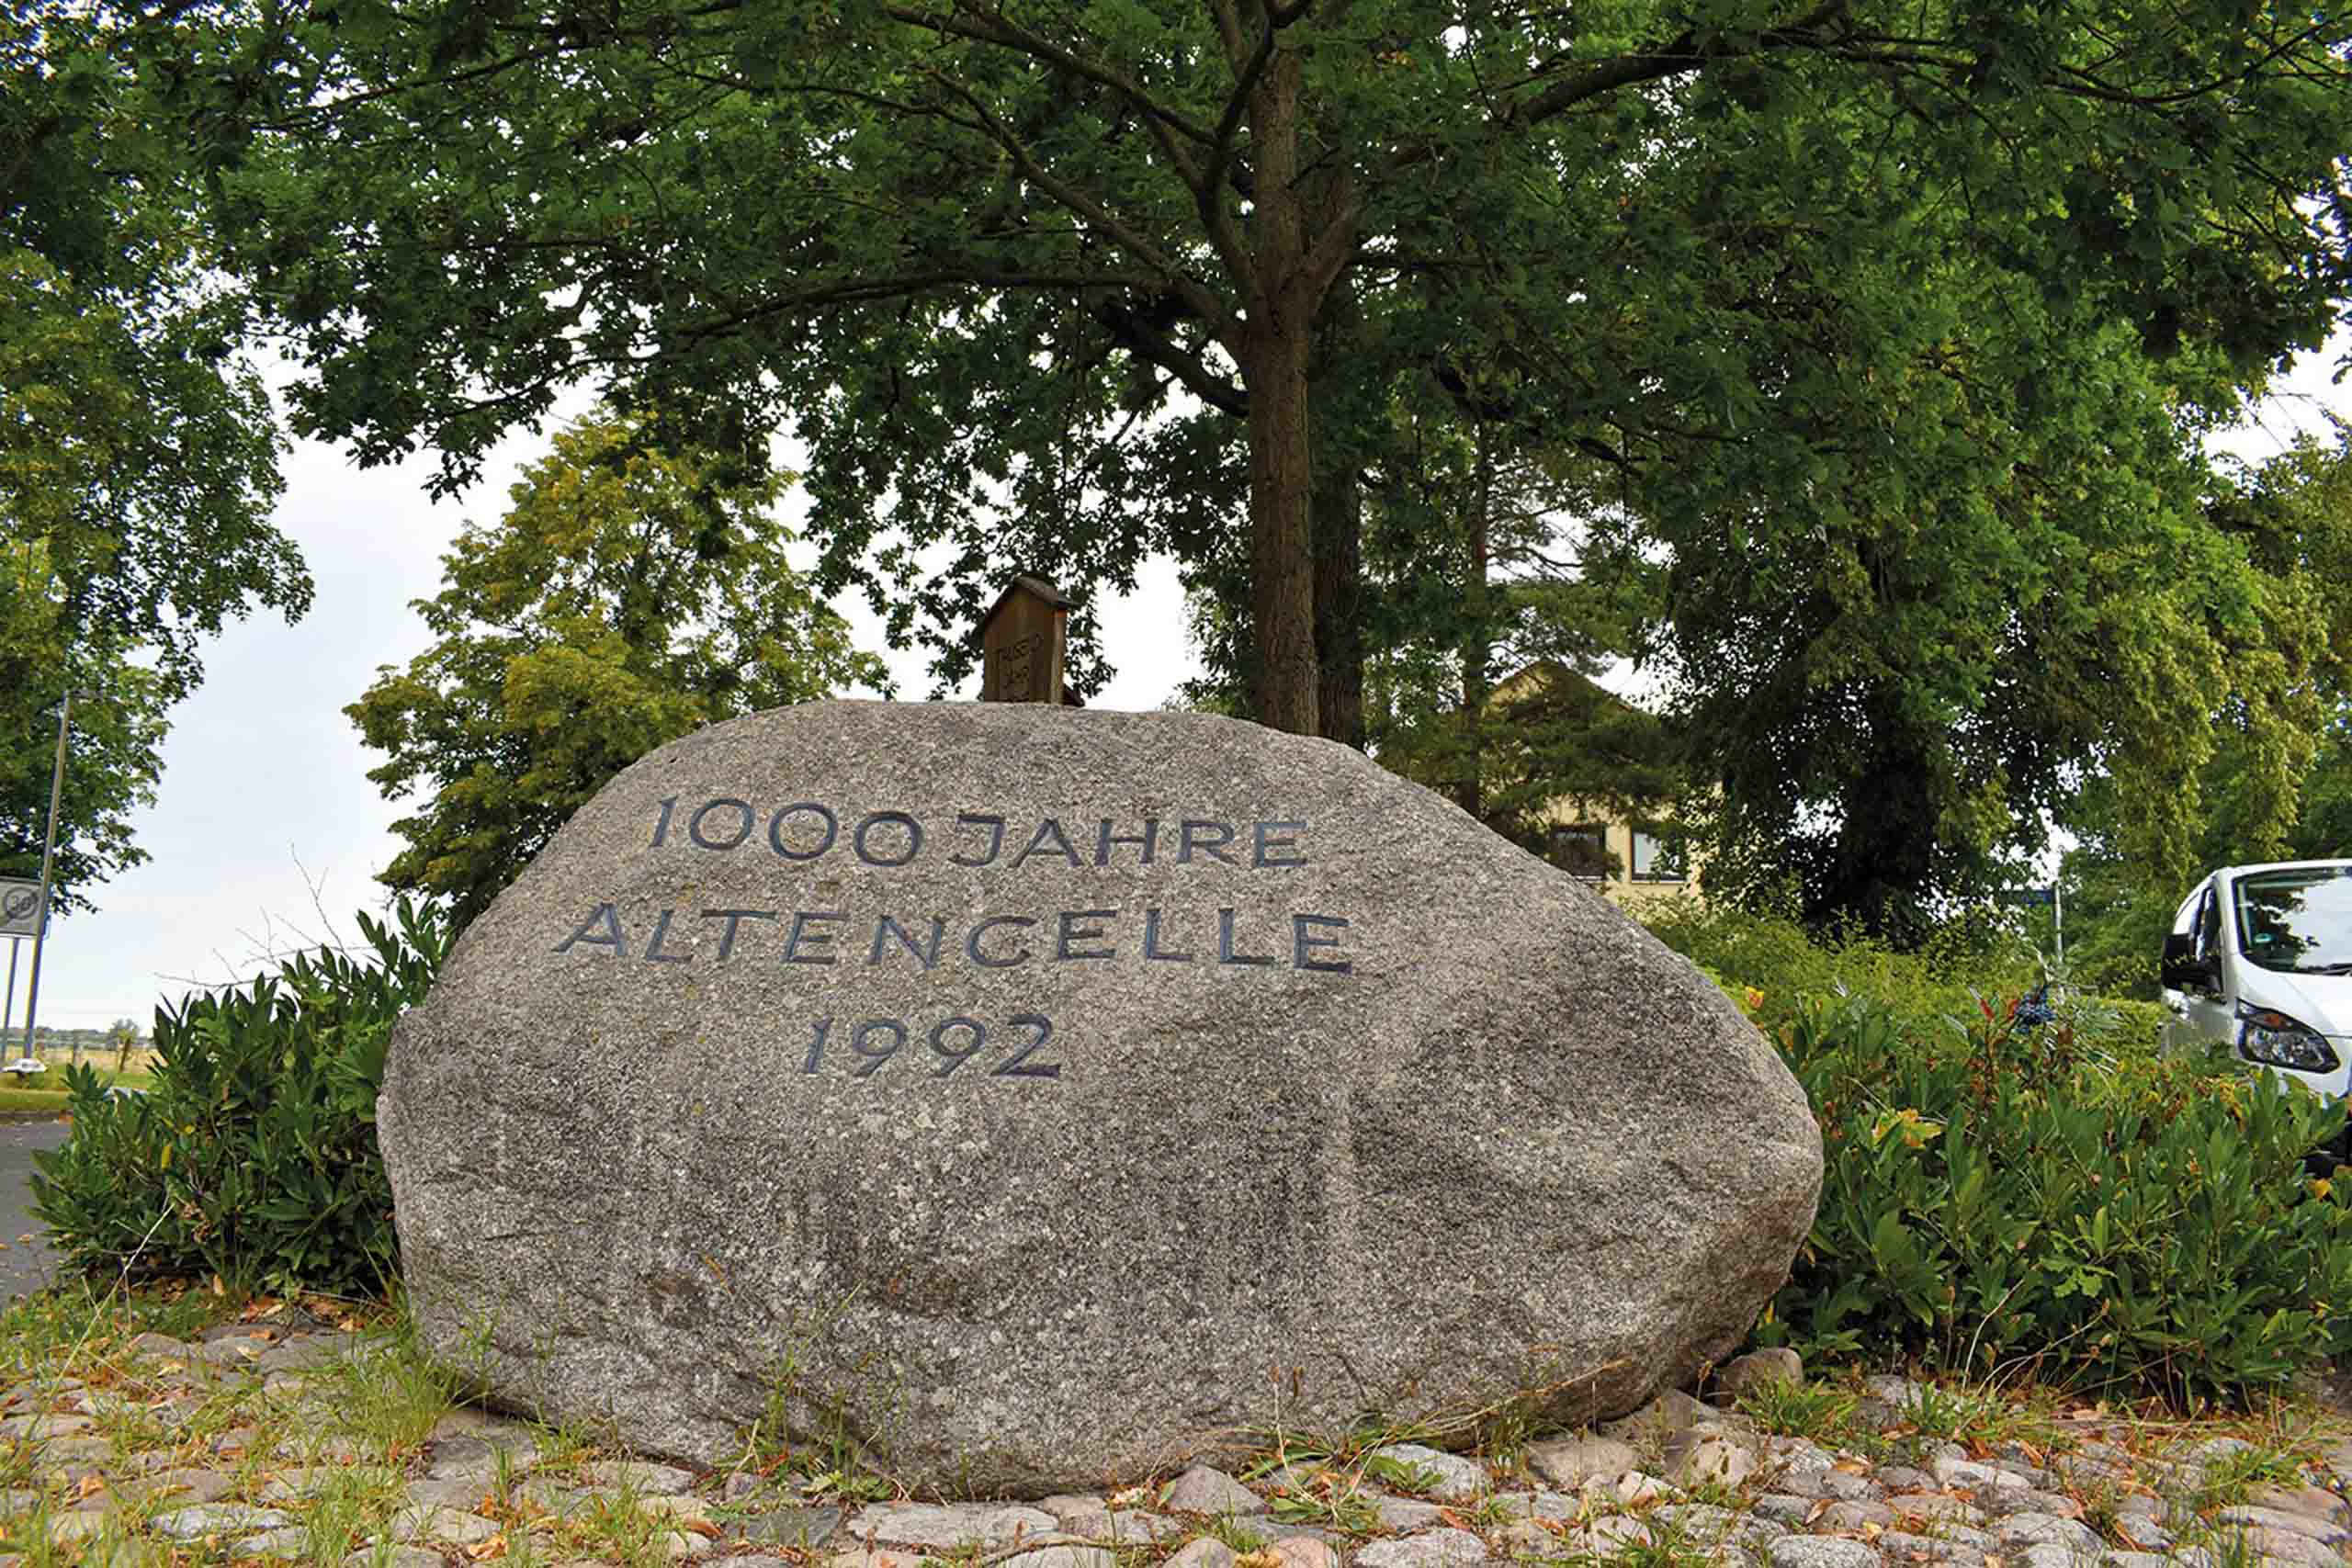 The 1000 years monument in Altencelle